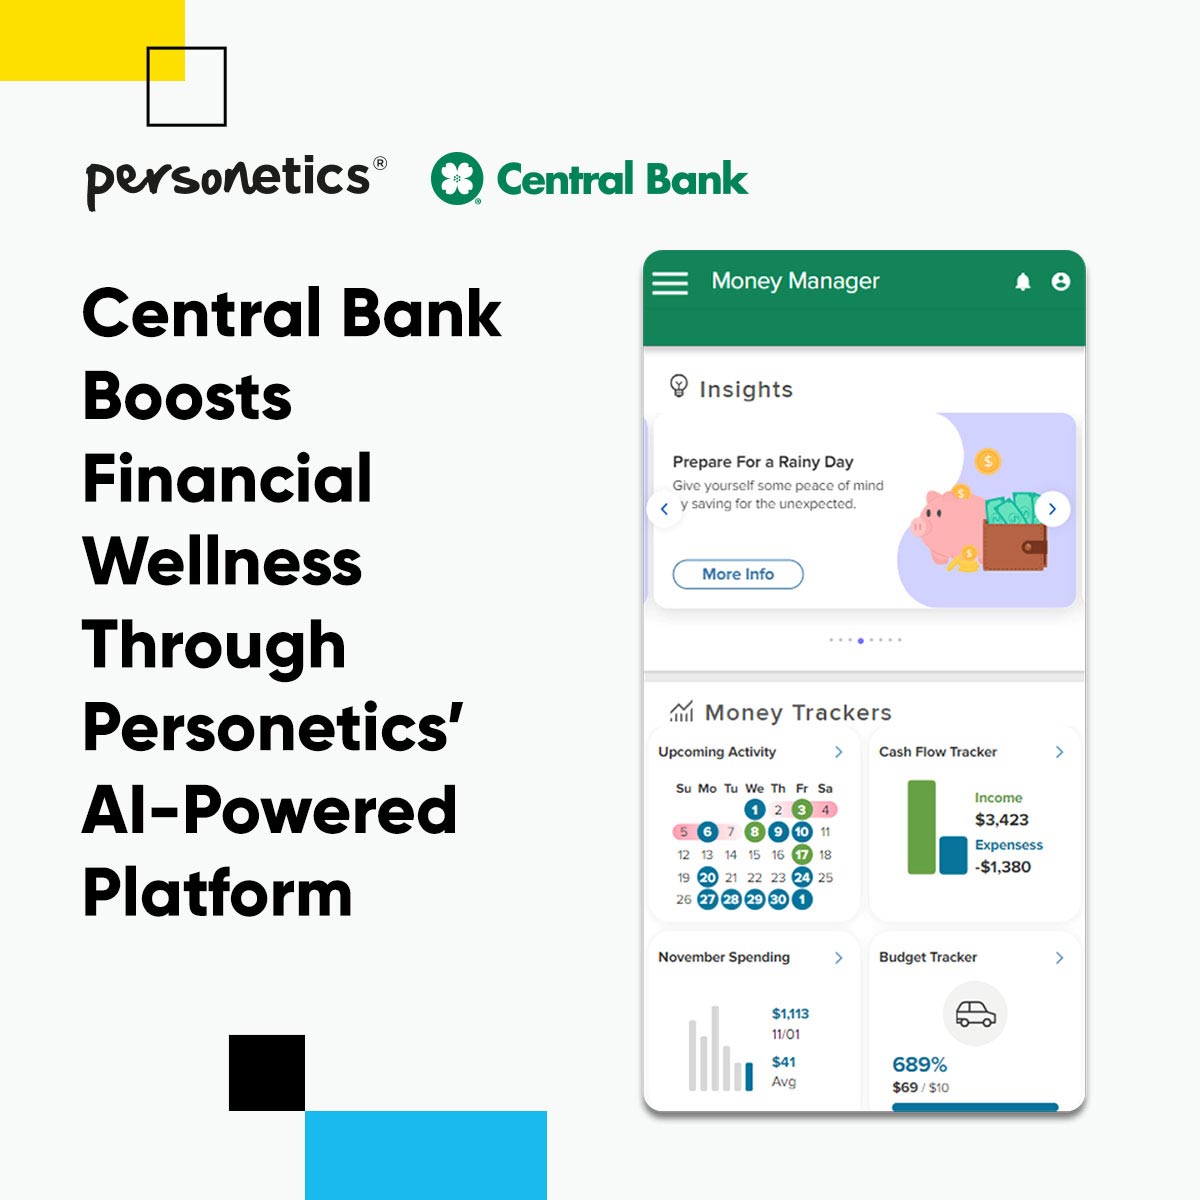 Central Bank Boosts Financial Wellness for Customers Through Personetics 